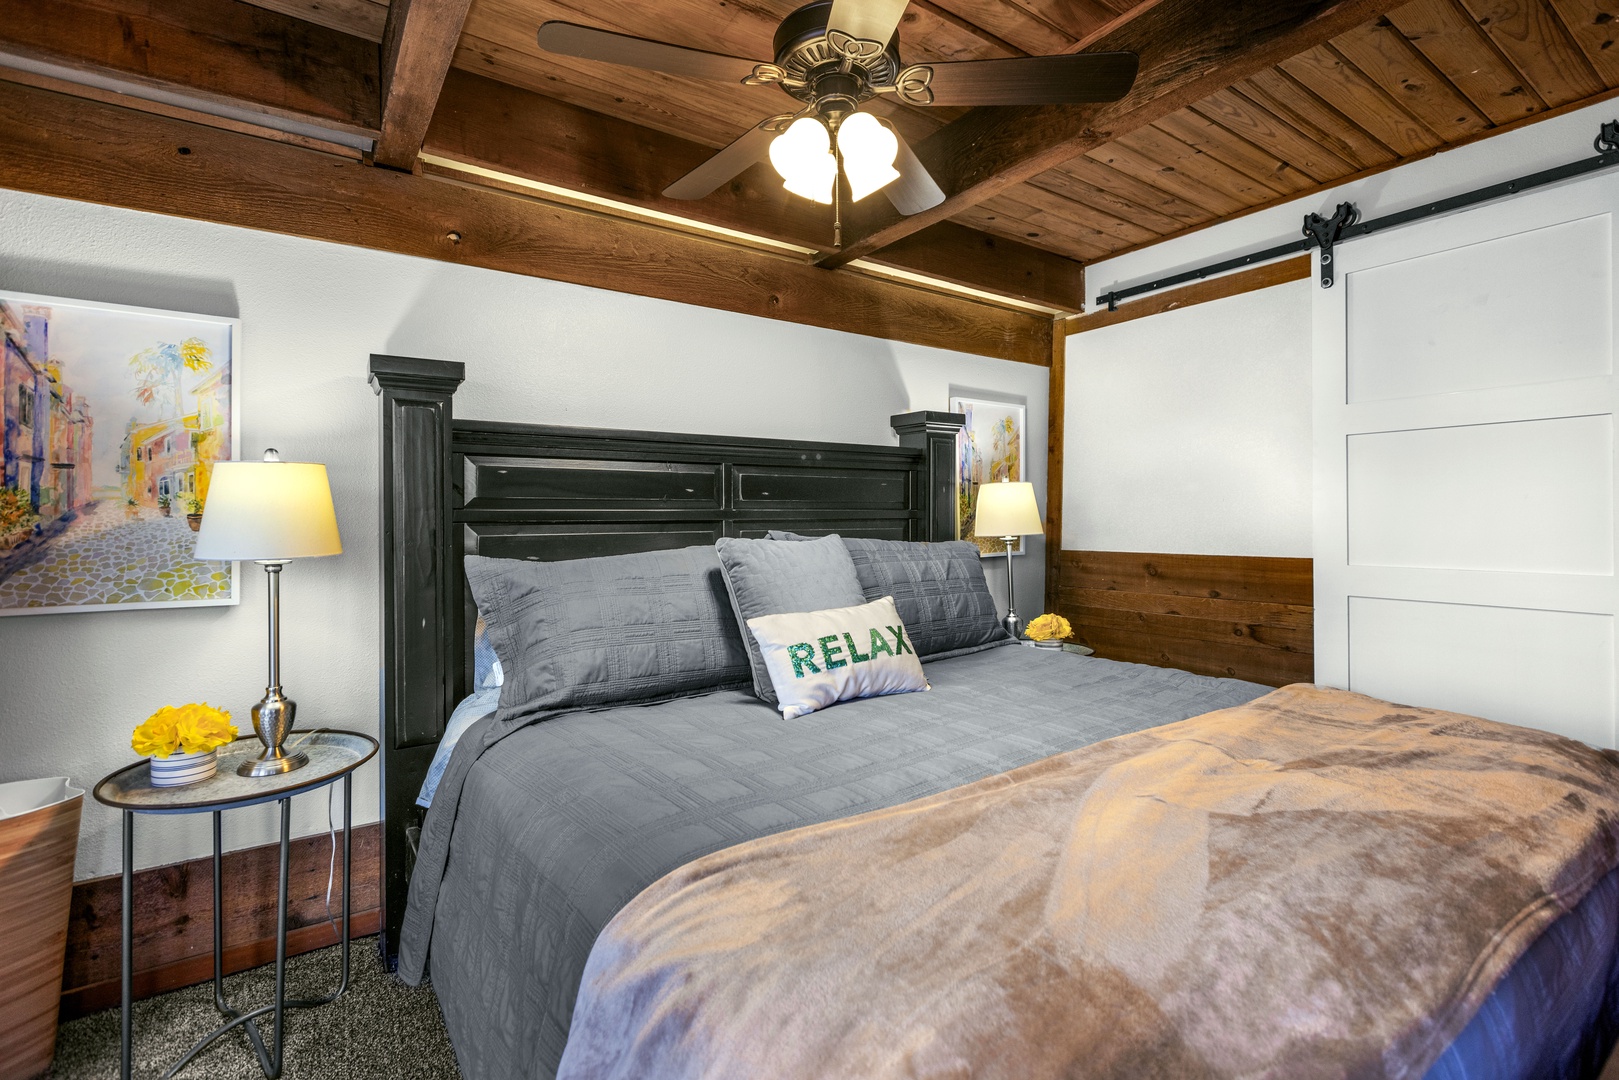 A regal king-sized bed is available in this luxurious suite